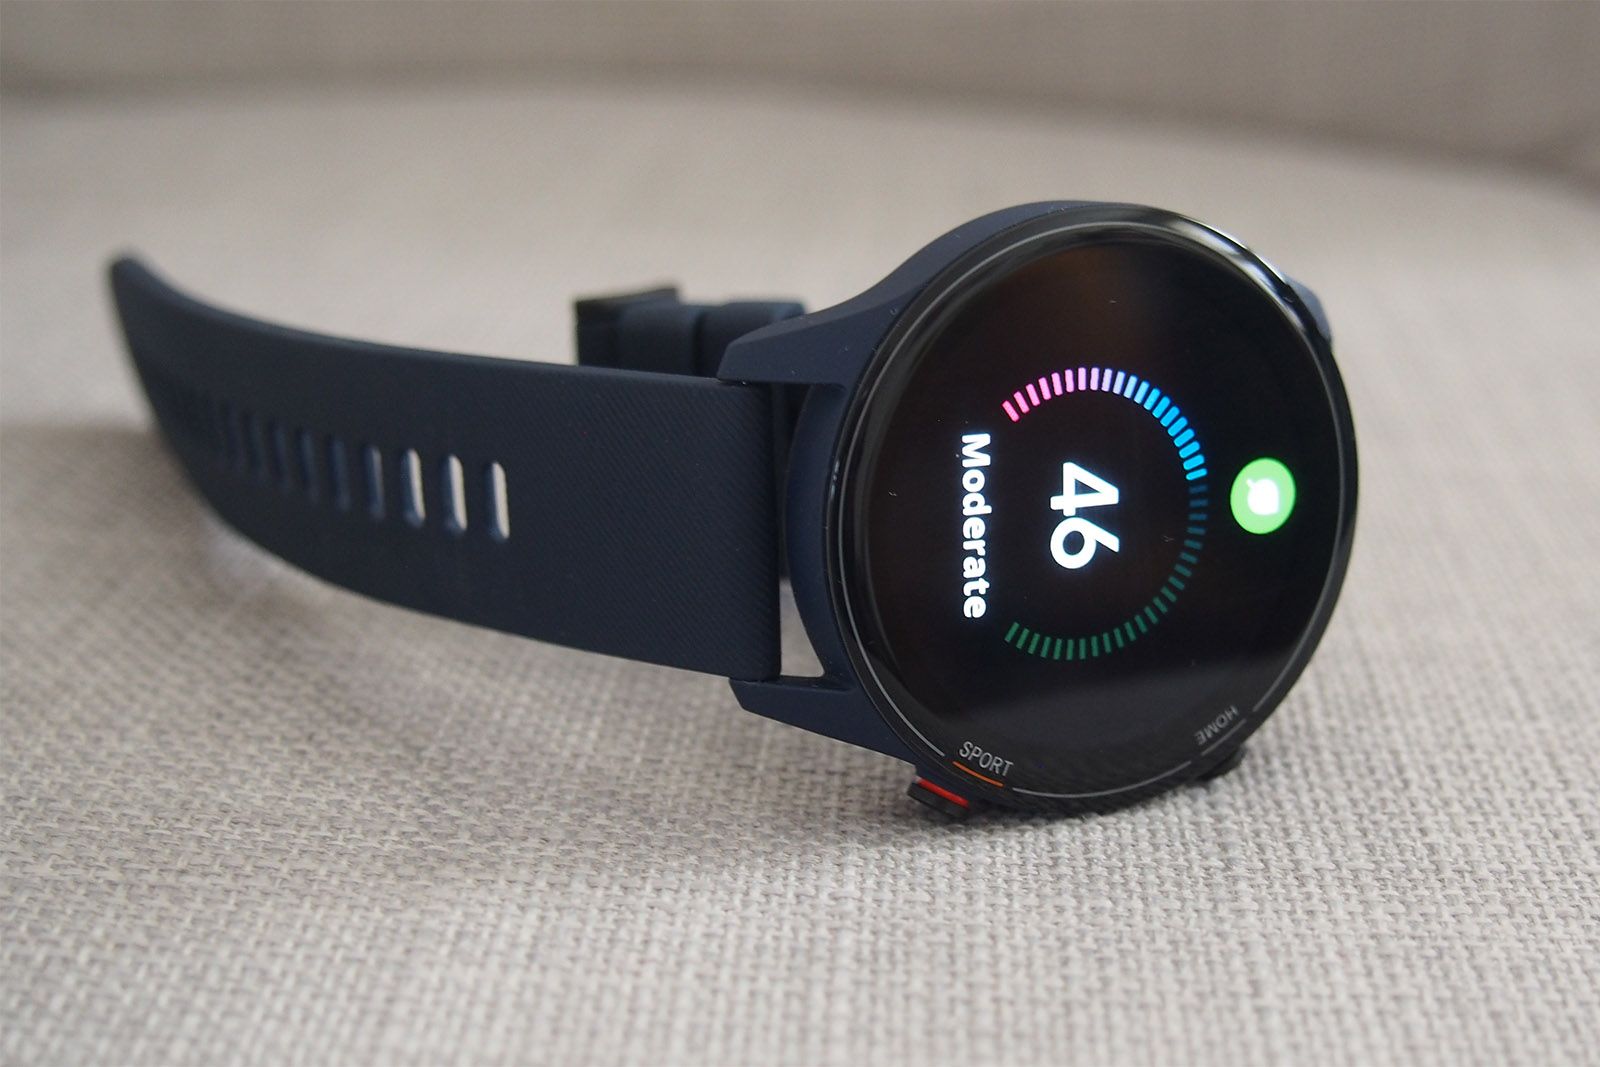 Xiaomi Mi Watch review: The best cheap smartwatch? - Android Authority